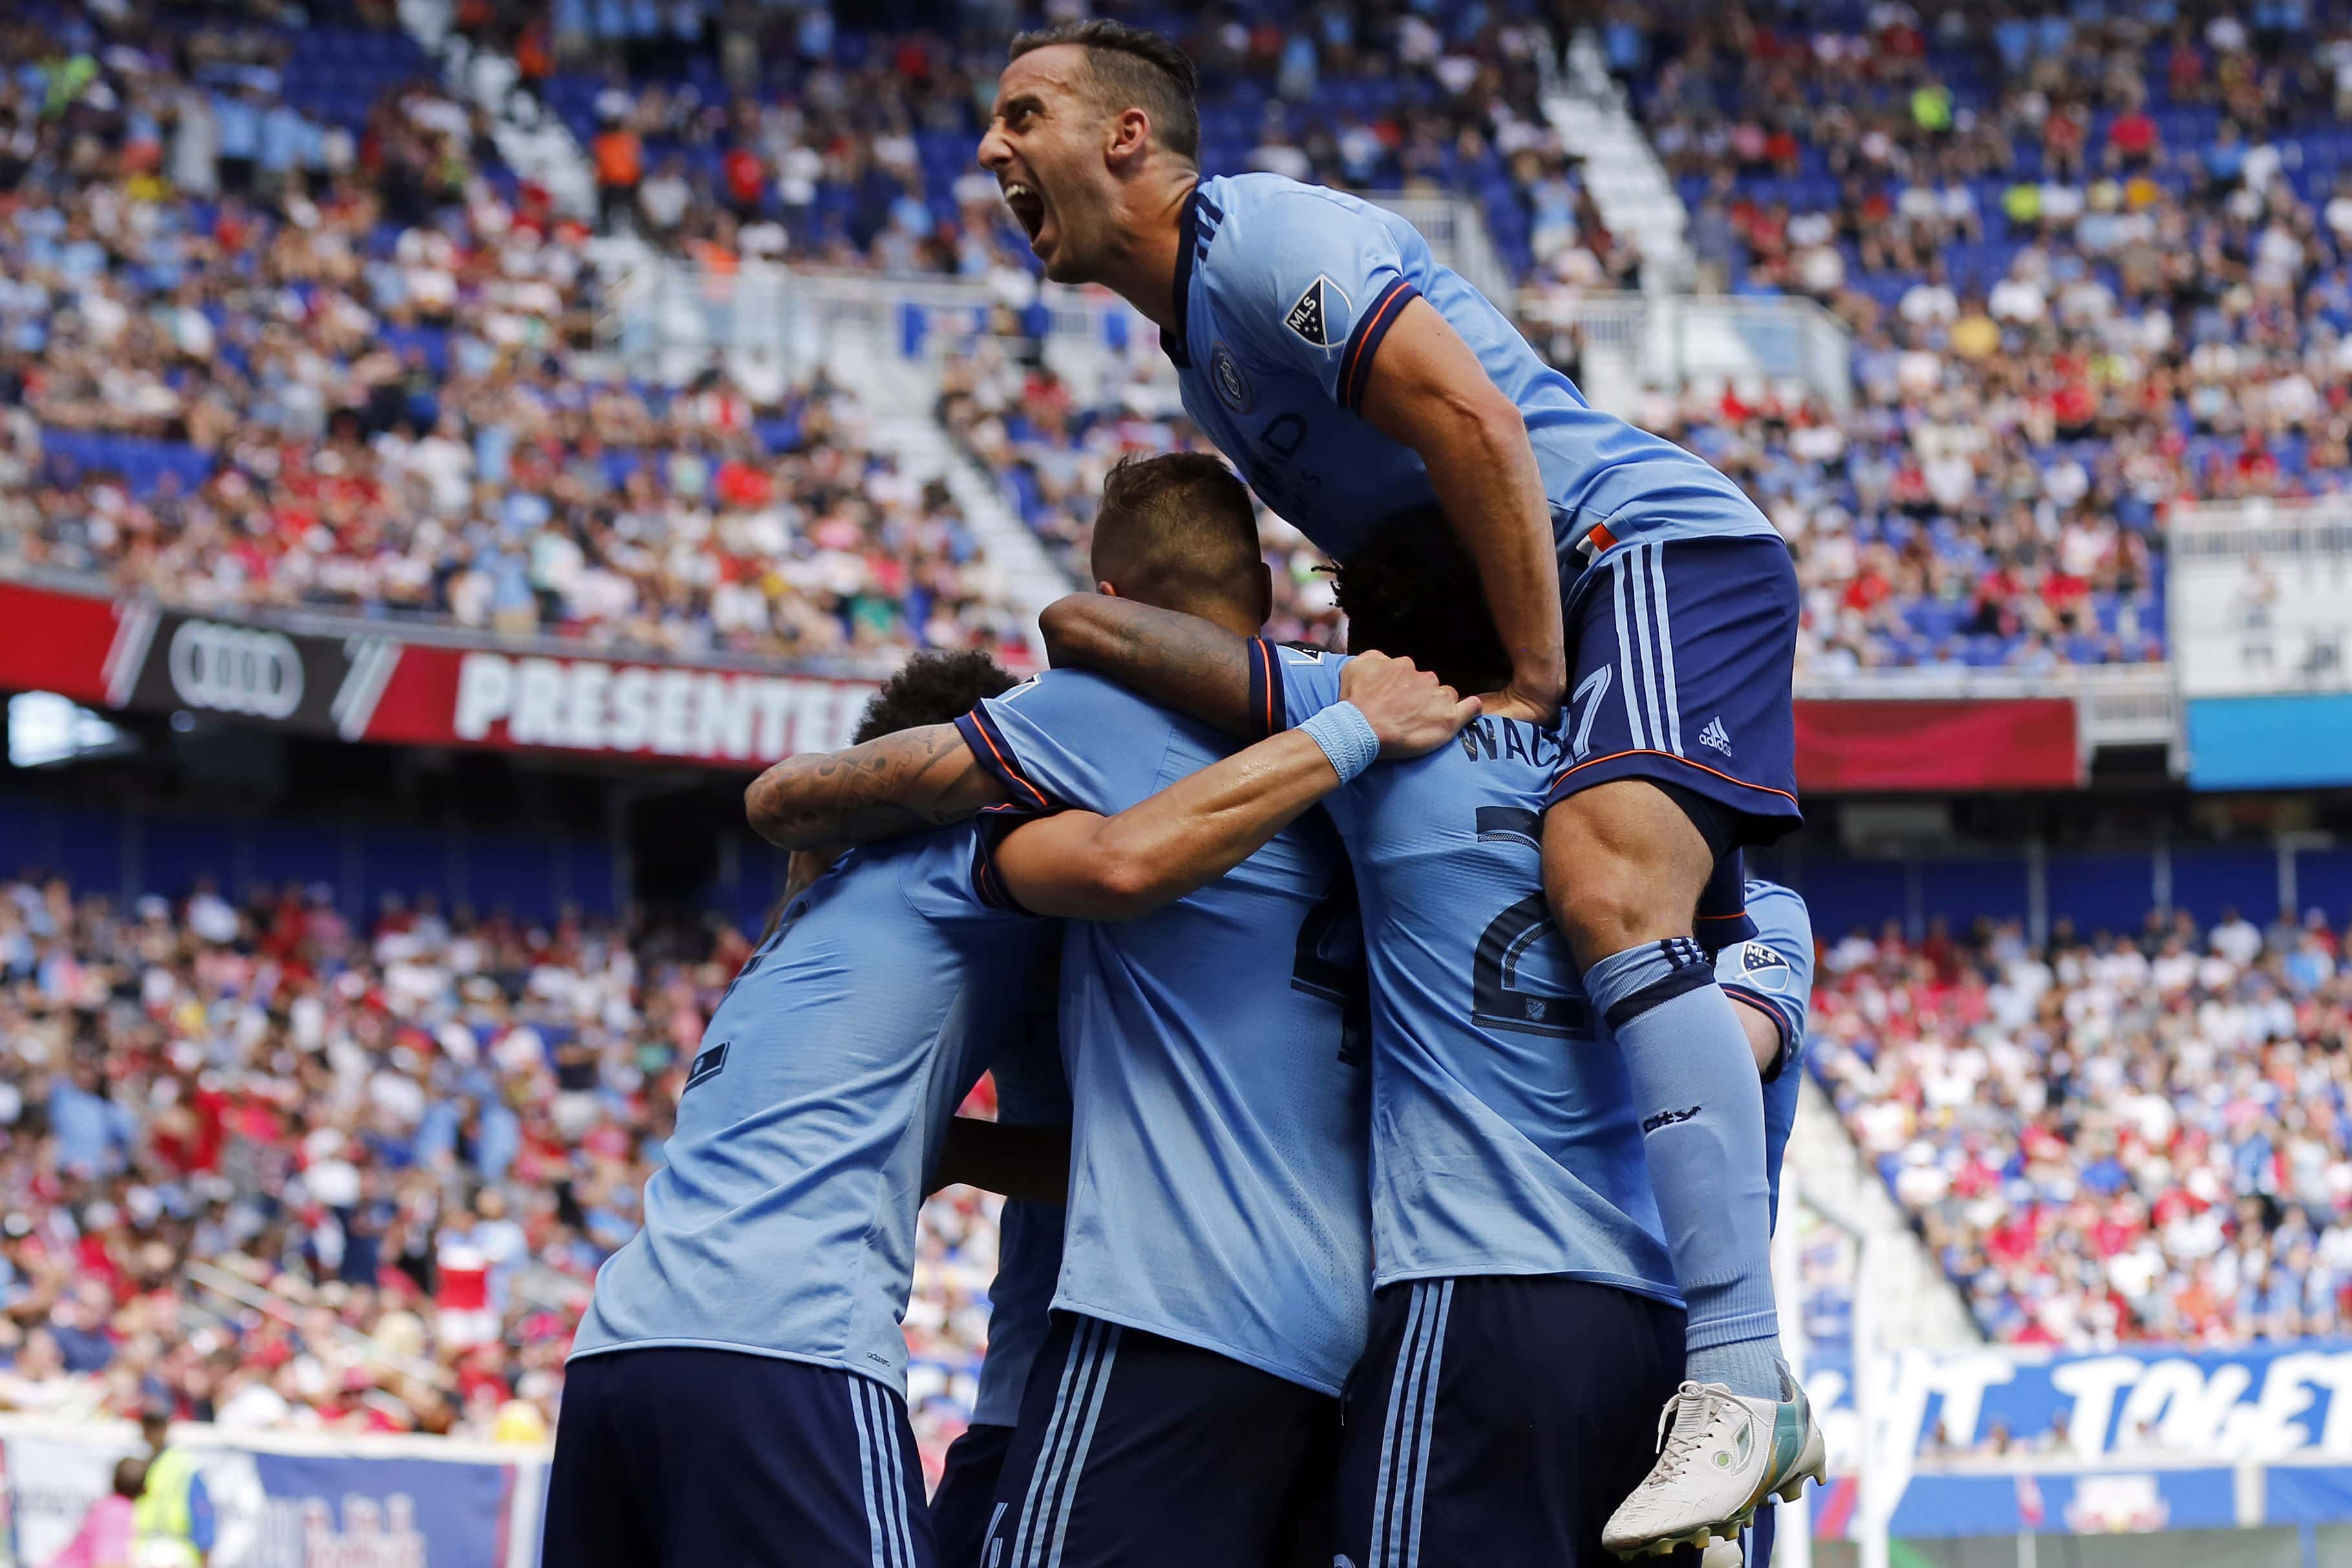 Jun 24, 2017; Harrison, NJ, USA; New York City FC defender RJ Allen (27) celebrates a goal scored by NYCFC defender Ben Sweat against the New York Red Bulls during the second half at Red Bull Arena. Mandatory Credit: Adam Hunger-USA TODAY Sports